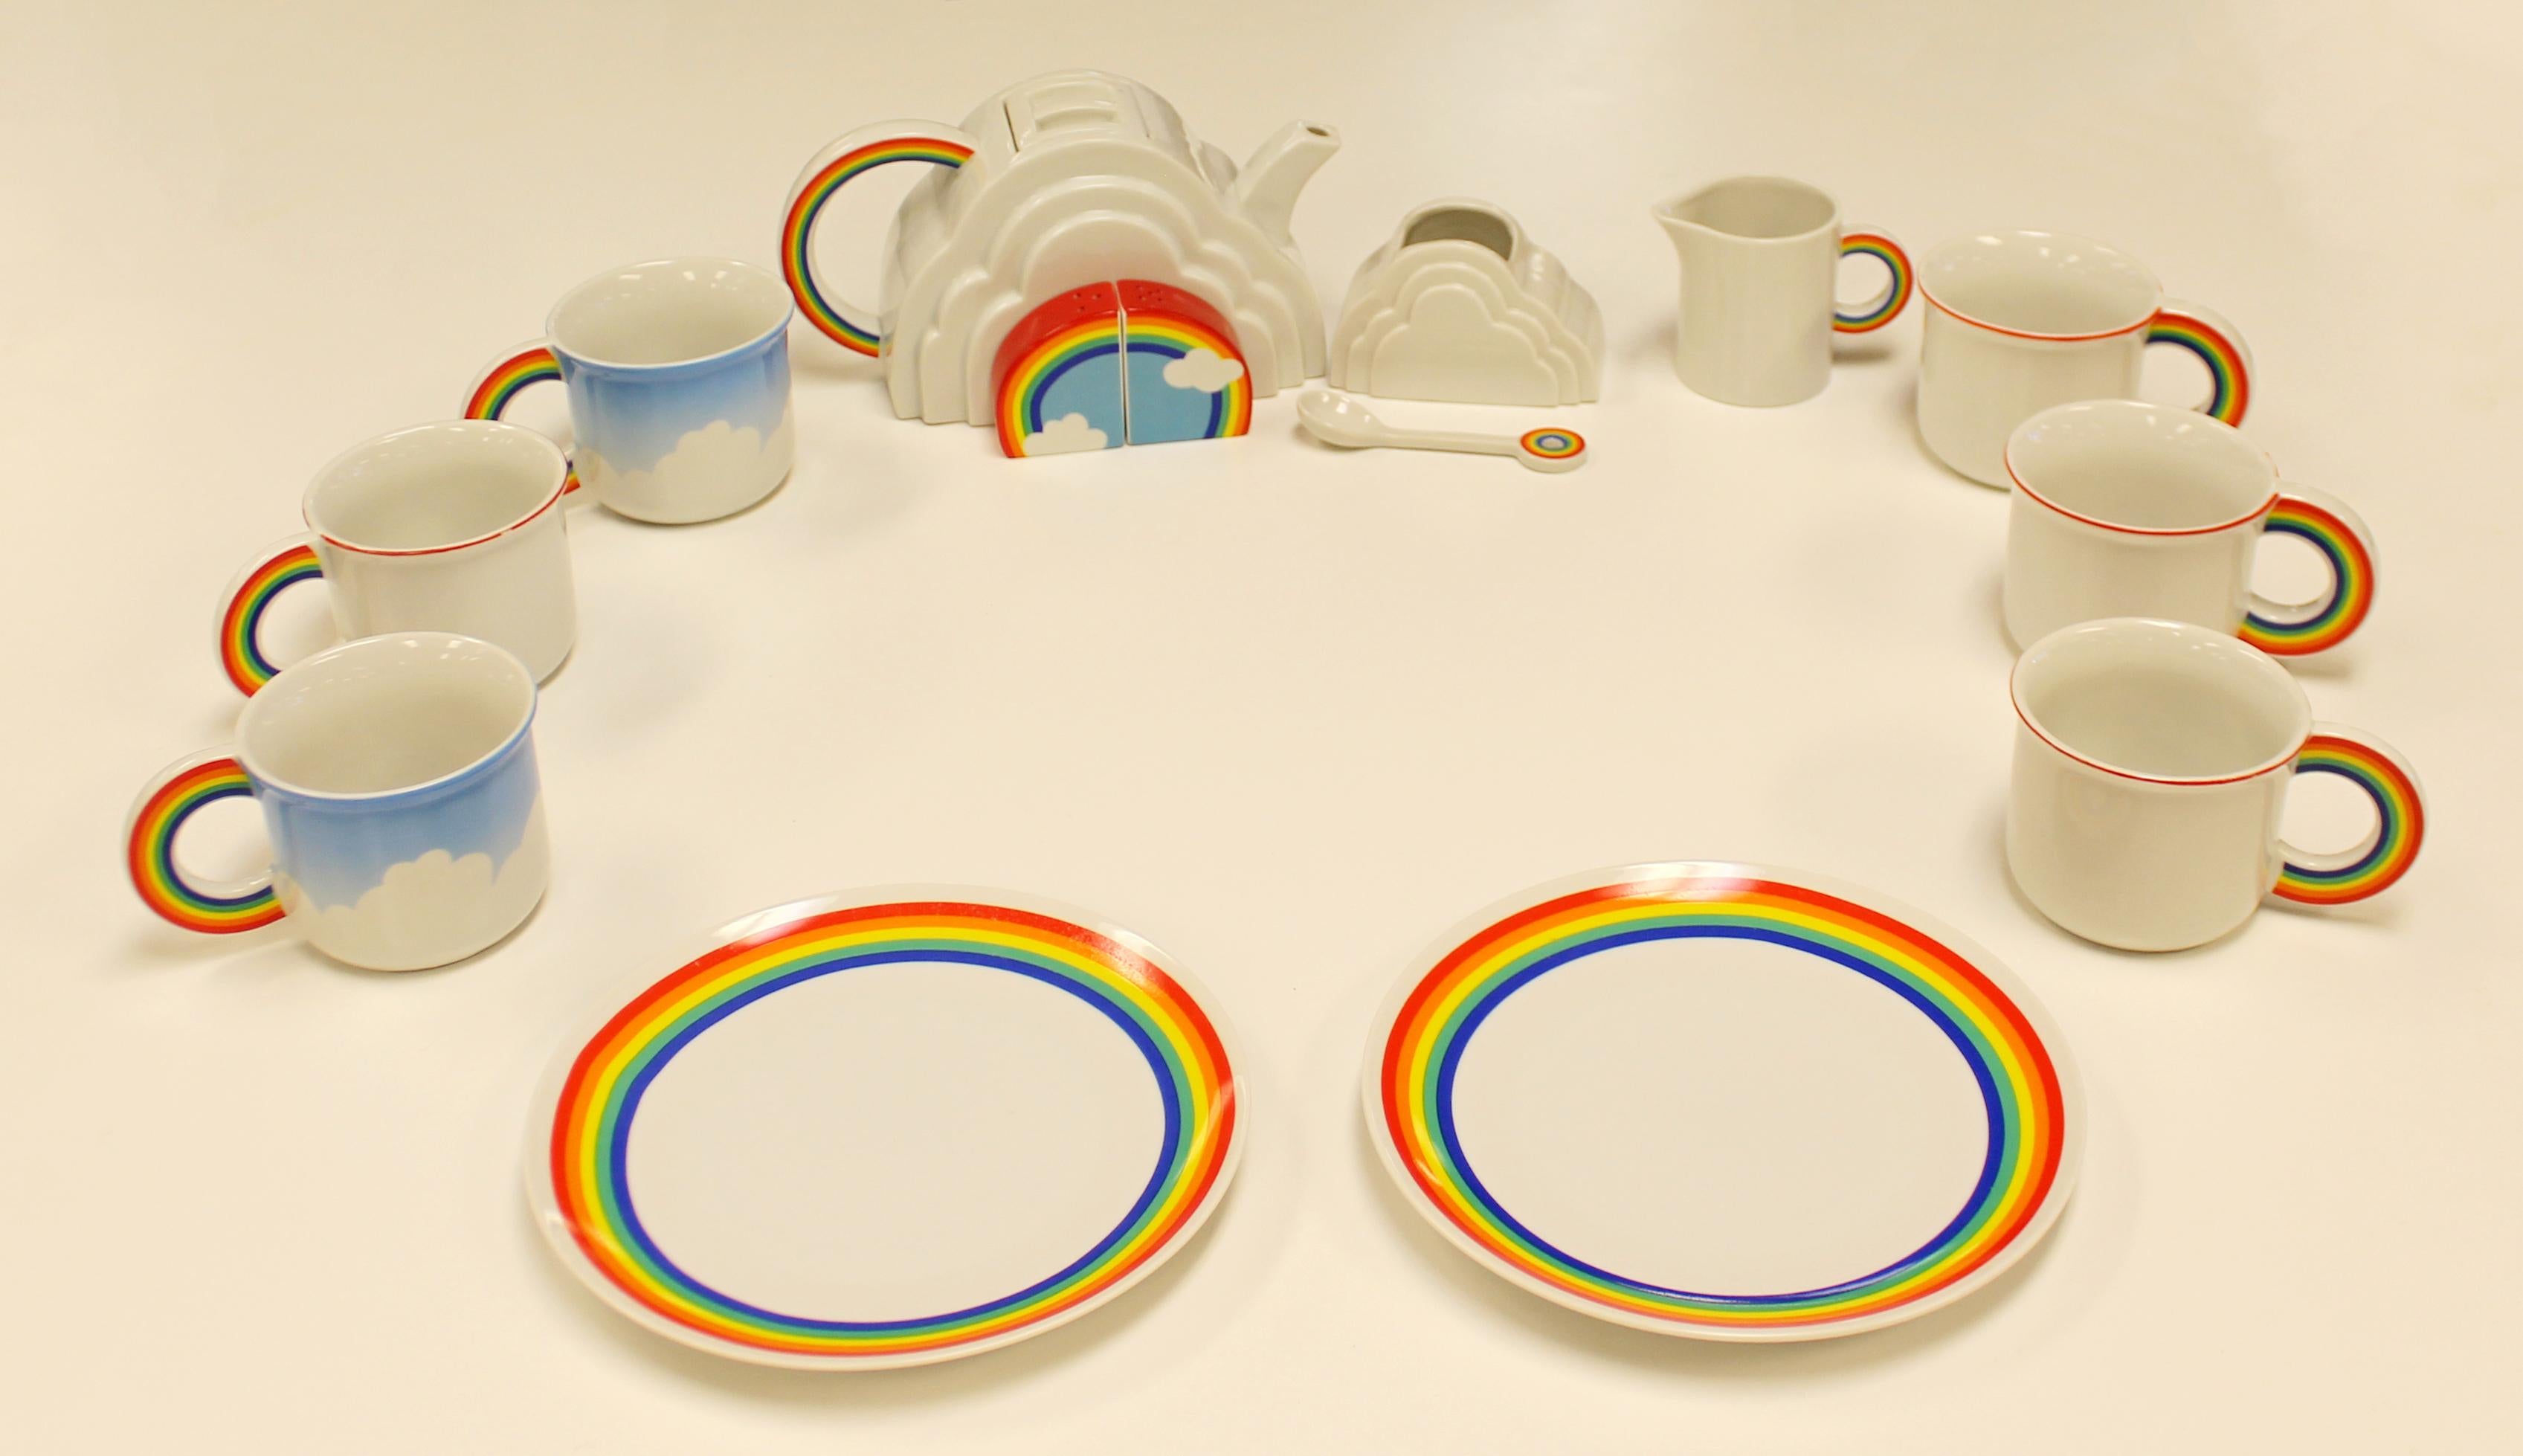 For your consideration is a Vandor Imports, rainbow sky pattern, ceramic tea/coffee service set, made in Japan, circa 1960s. Set includes six mugs, two plates, a sugar bowl with spoon, a creamer and a tea pot. In excellent condition. The dimensions